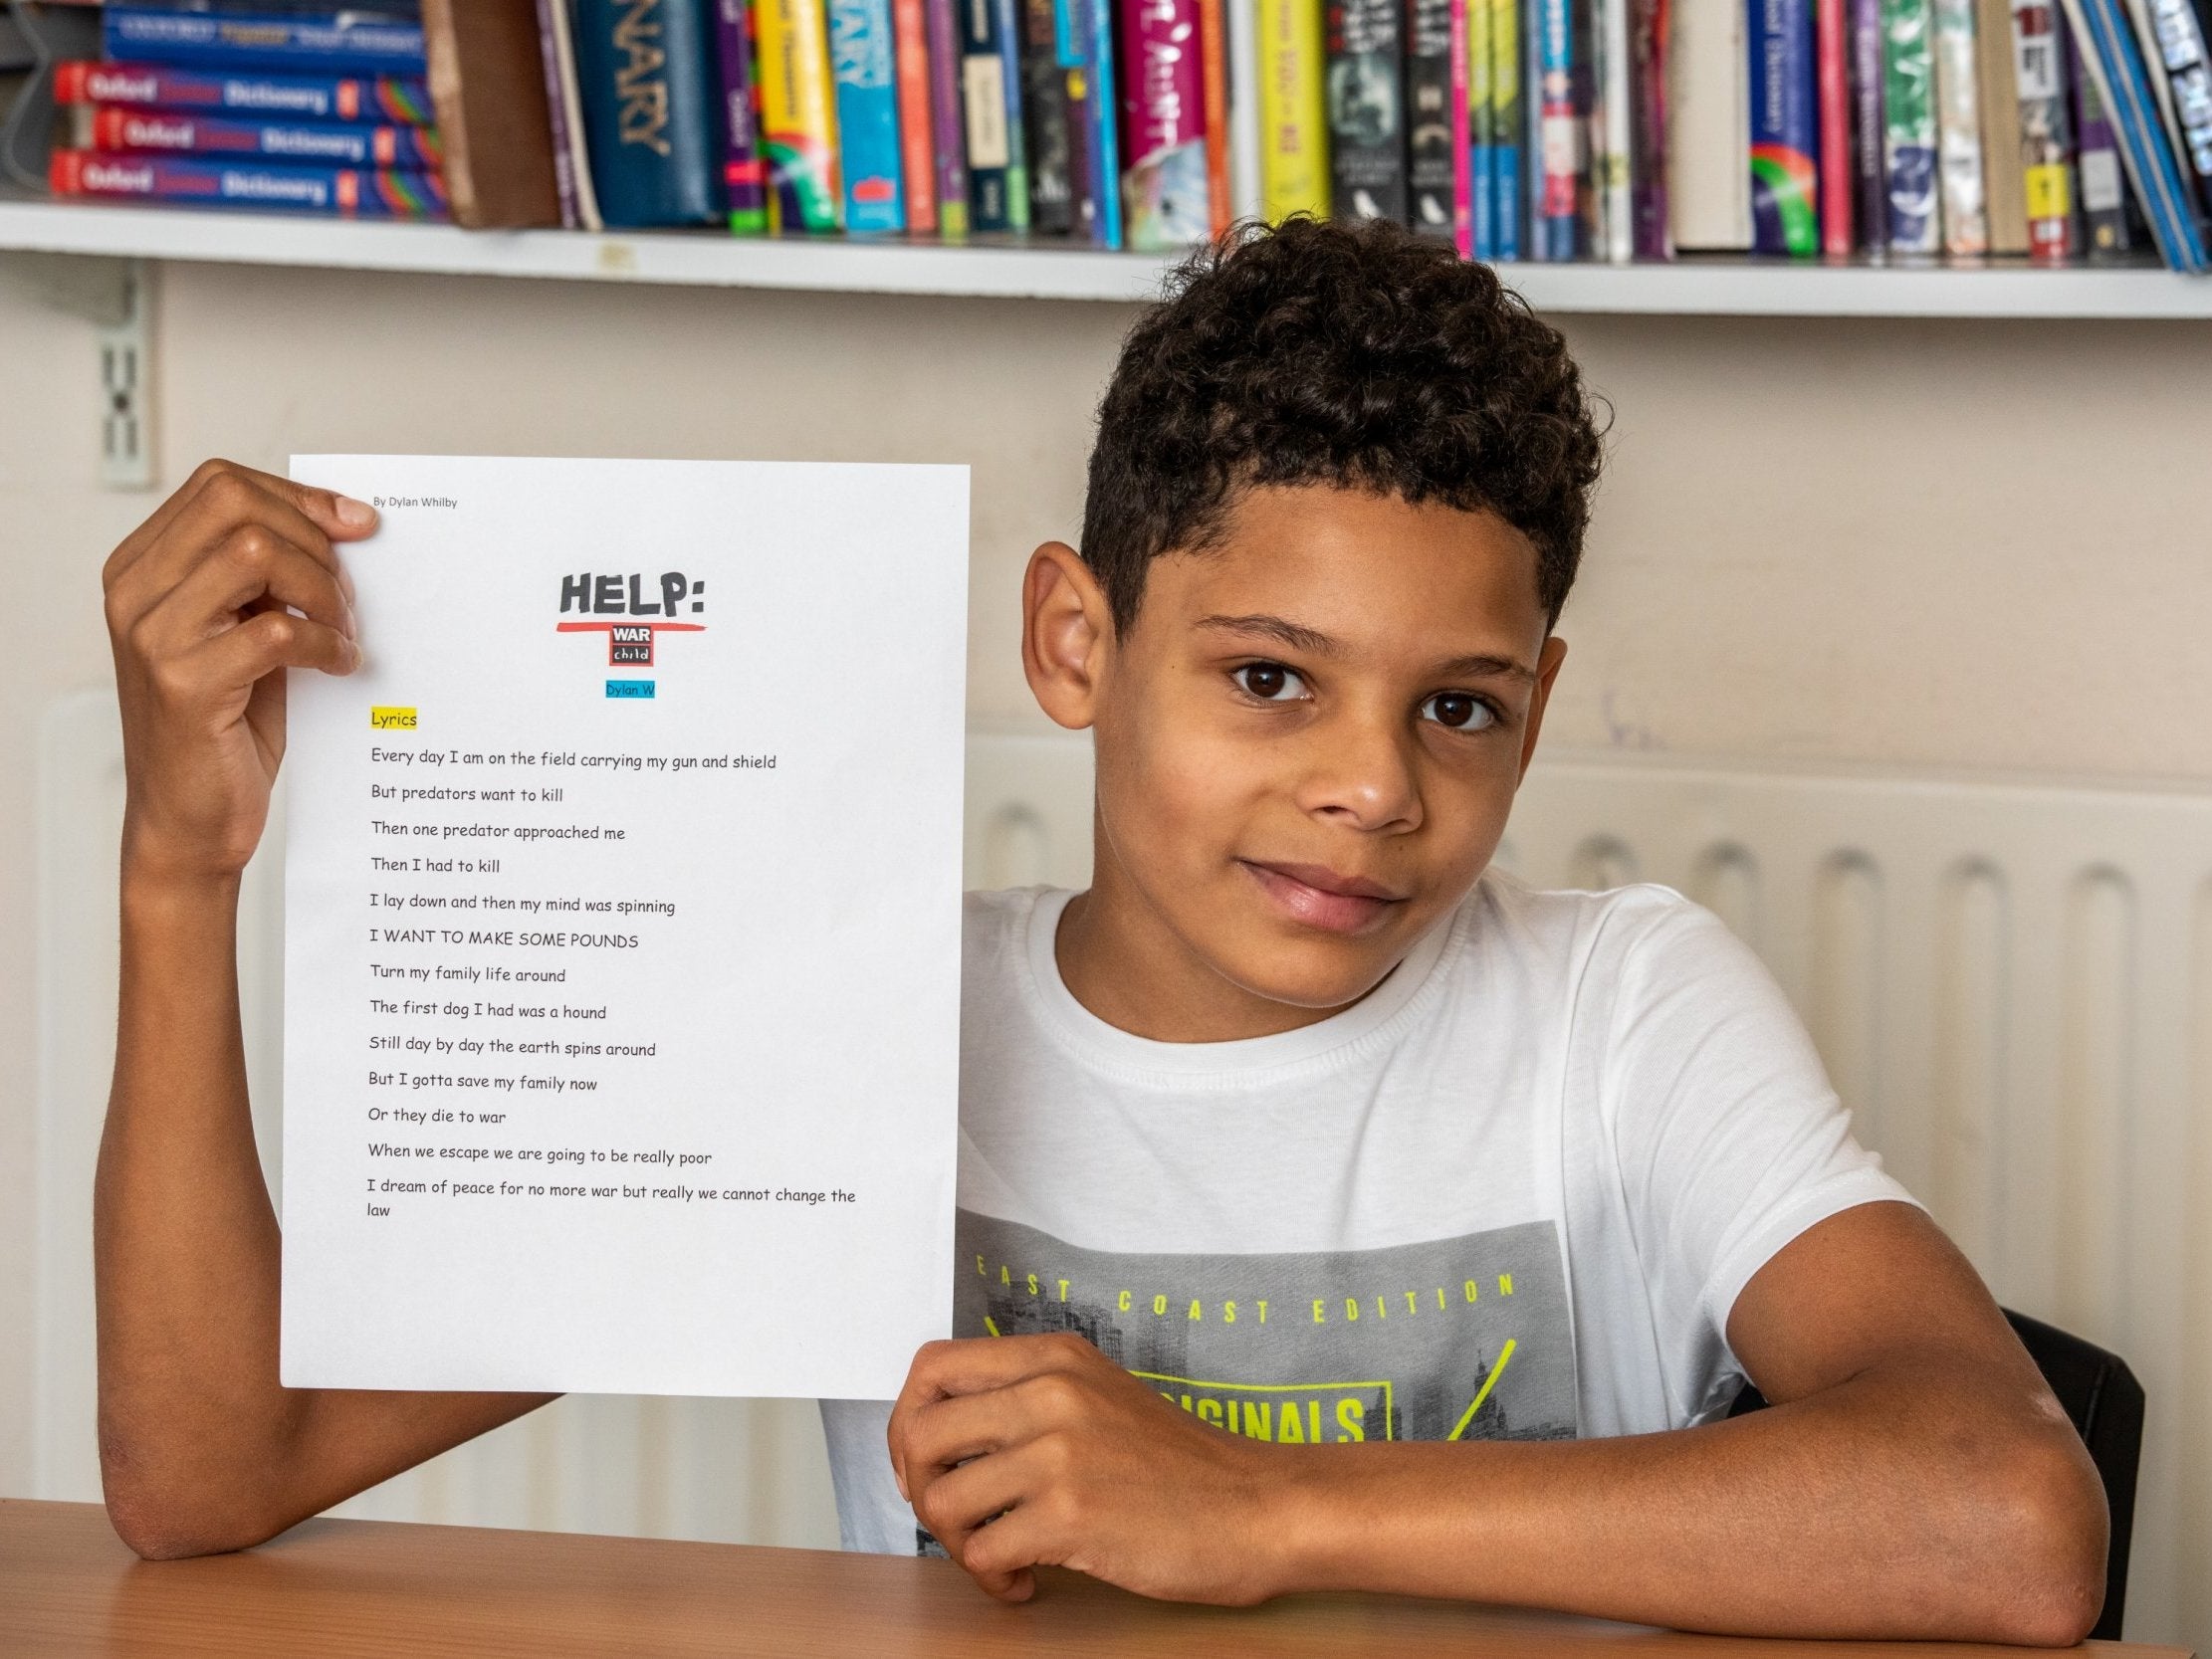 Twelve-year-old Dylan, who attends the Frances Barber Pupil Referral Unit in Wandsworth, south London, shows off his lyrics